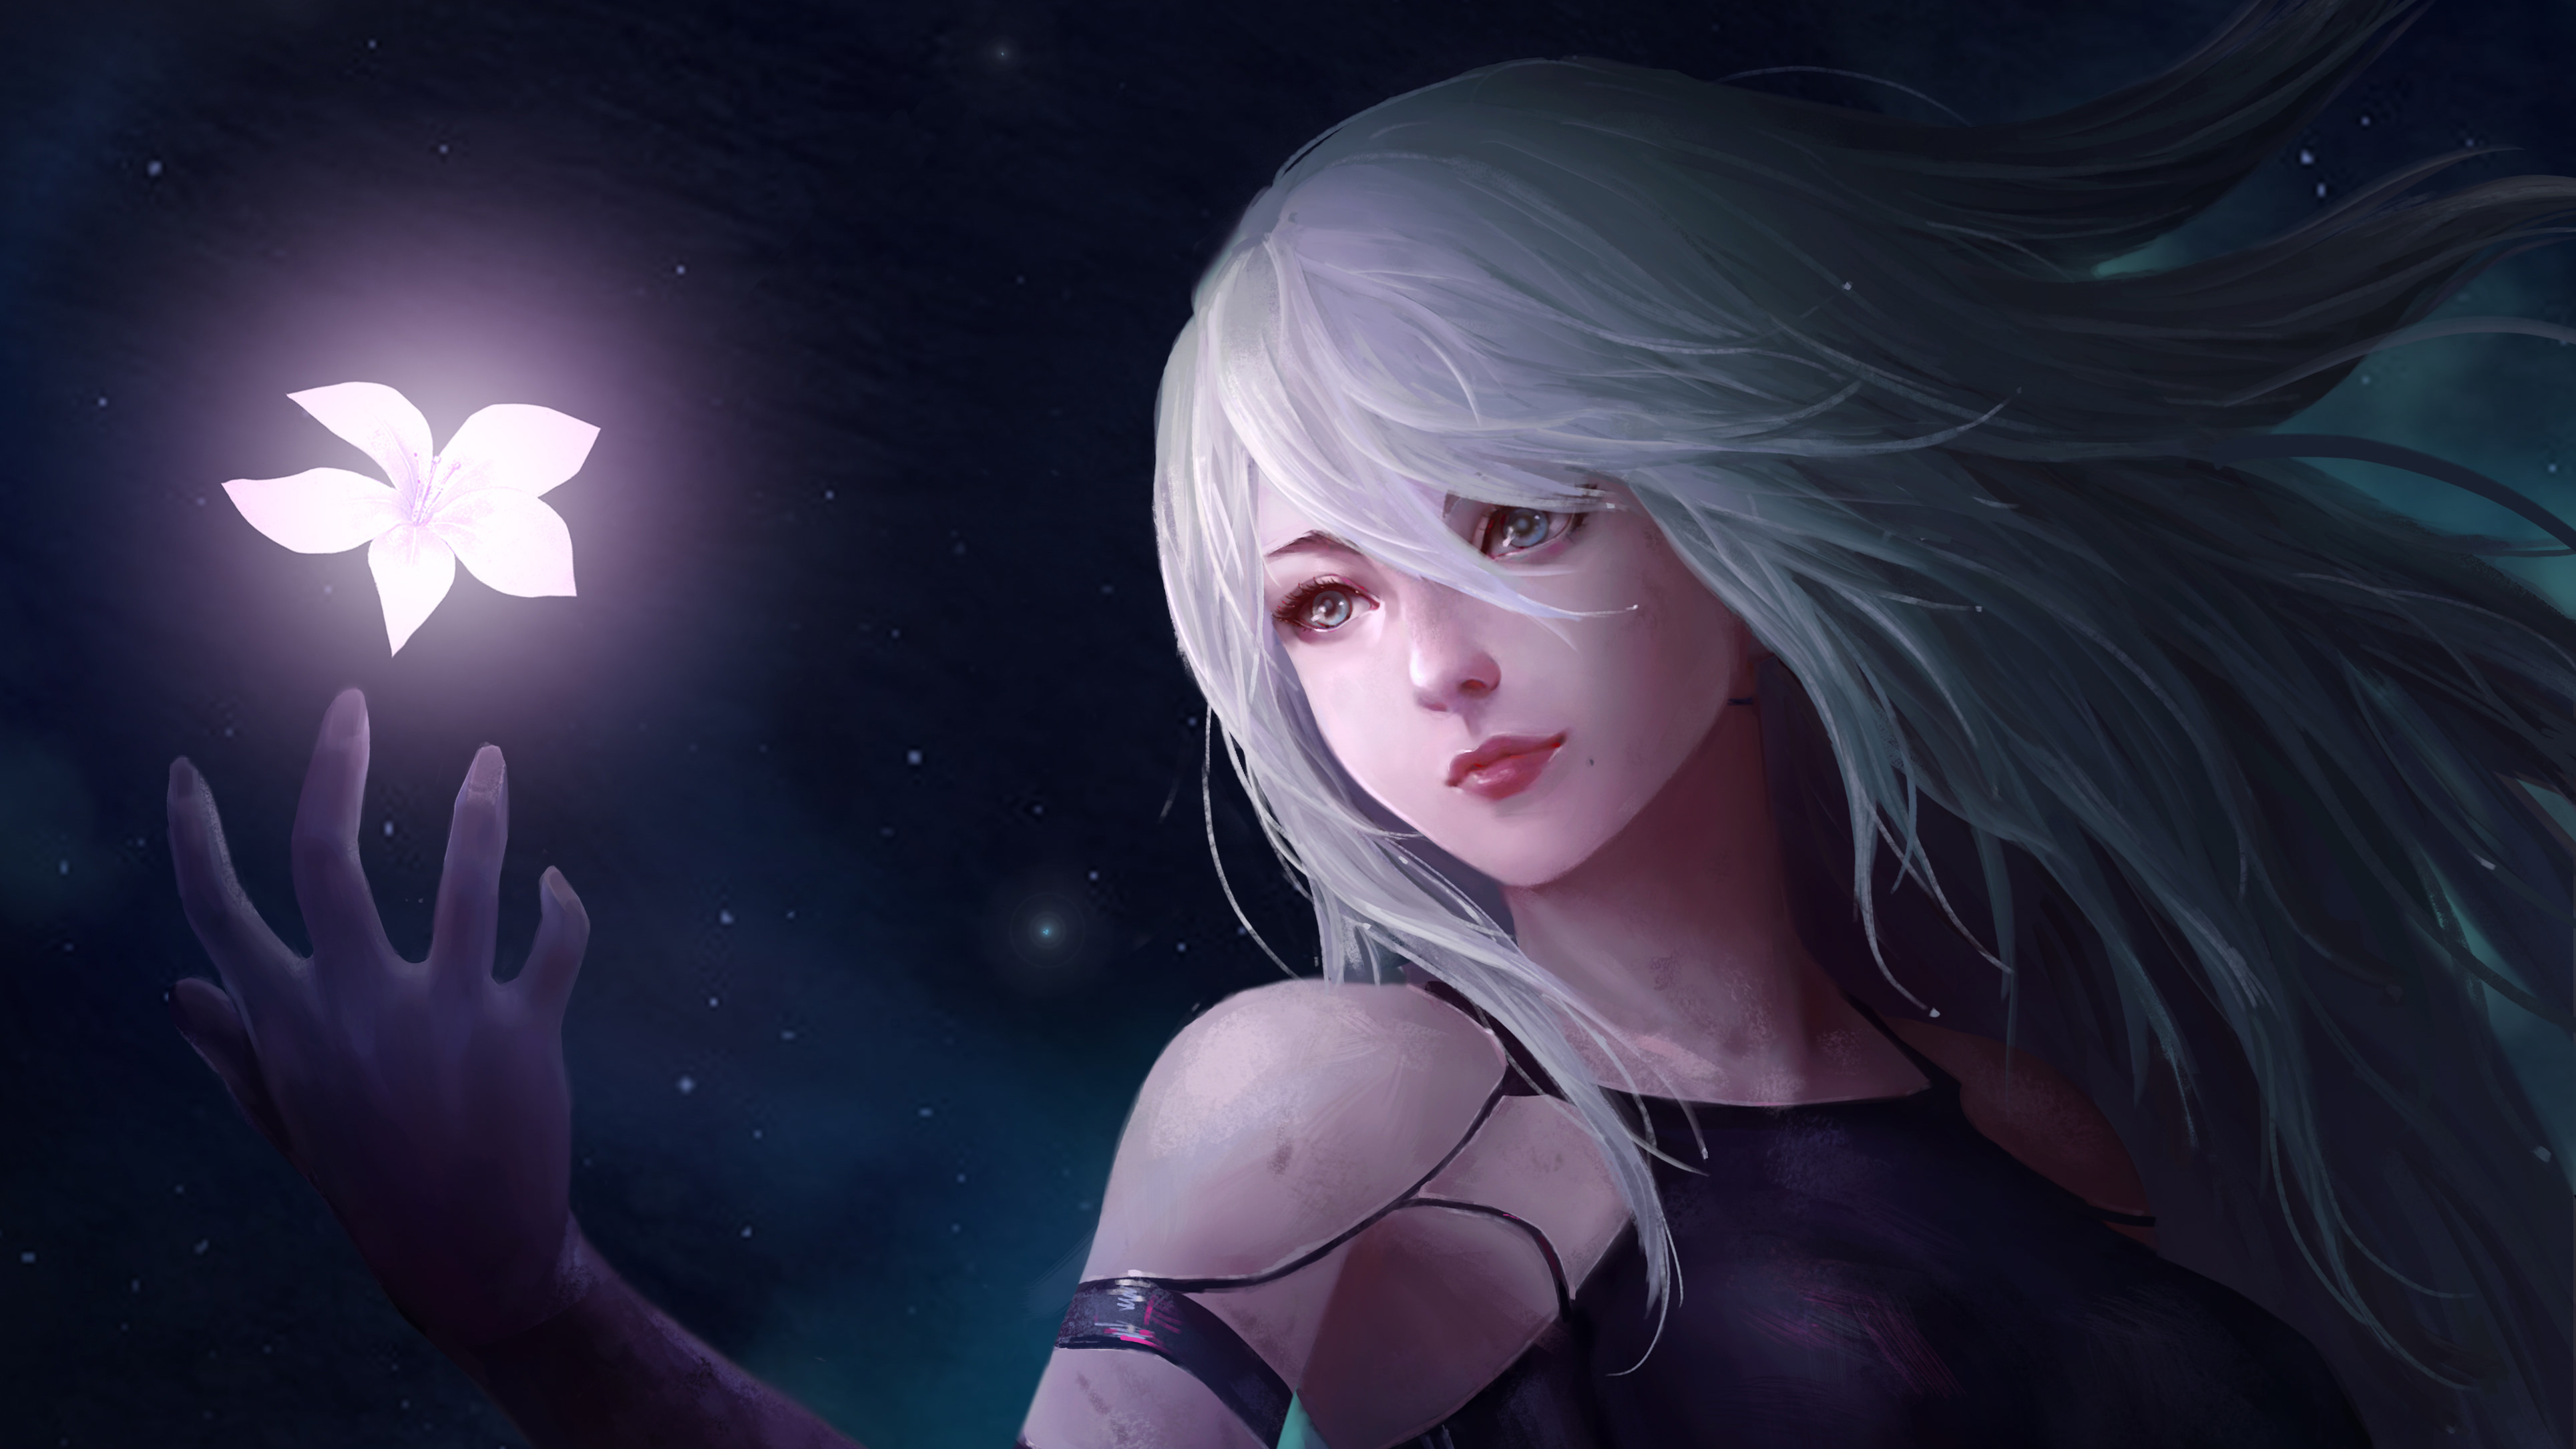 Nier Automata 4k Artwork, HD Games, 4k Wallpapers, Images, Backgrounds